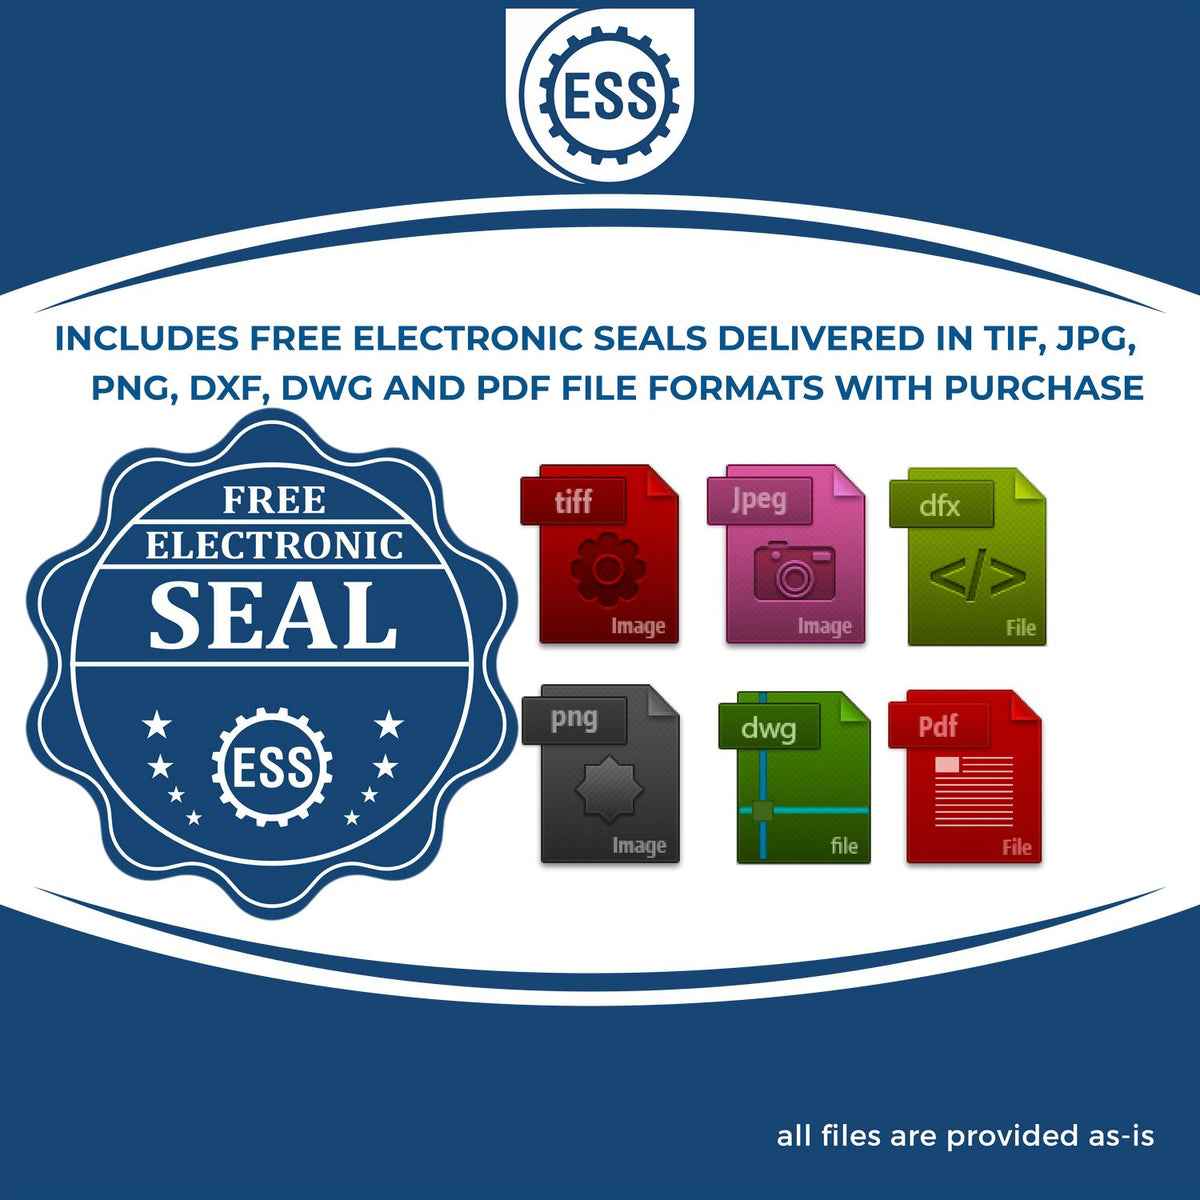 An infographic for the free electronic seal for the Slim Pre-Inked Texas Professional Geologist Seal Stamp illustrating the different file type icons such as DXF, DWG, TIF, JPG and PNG.